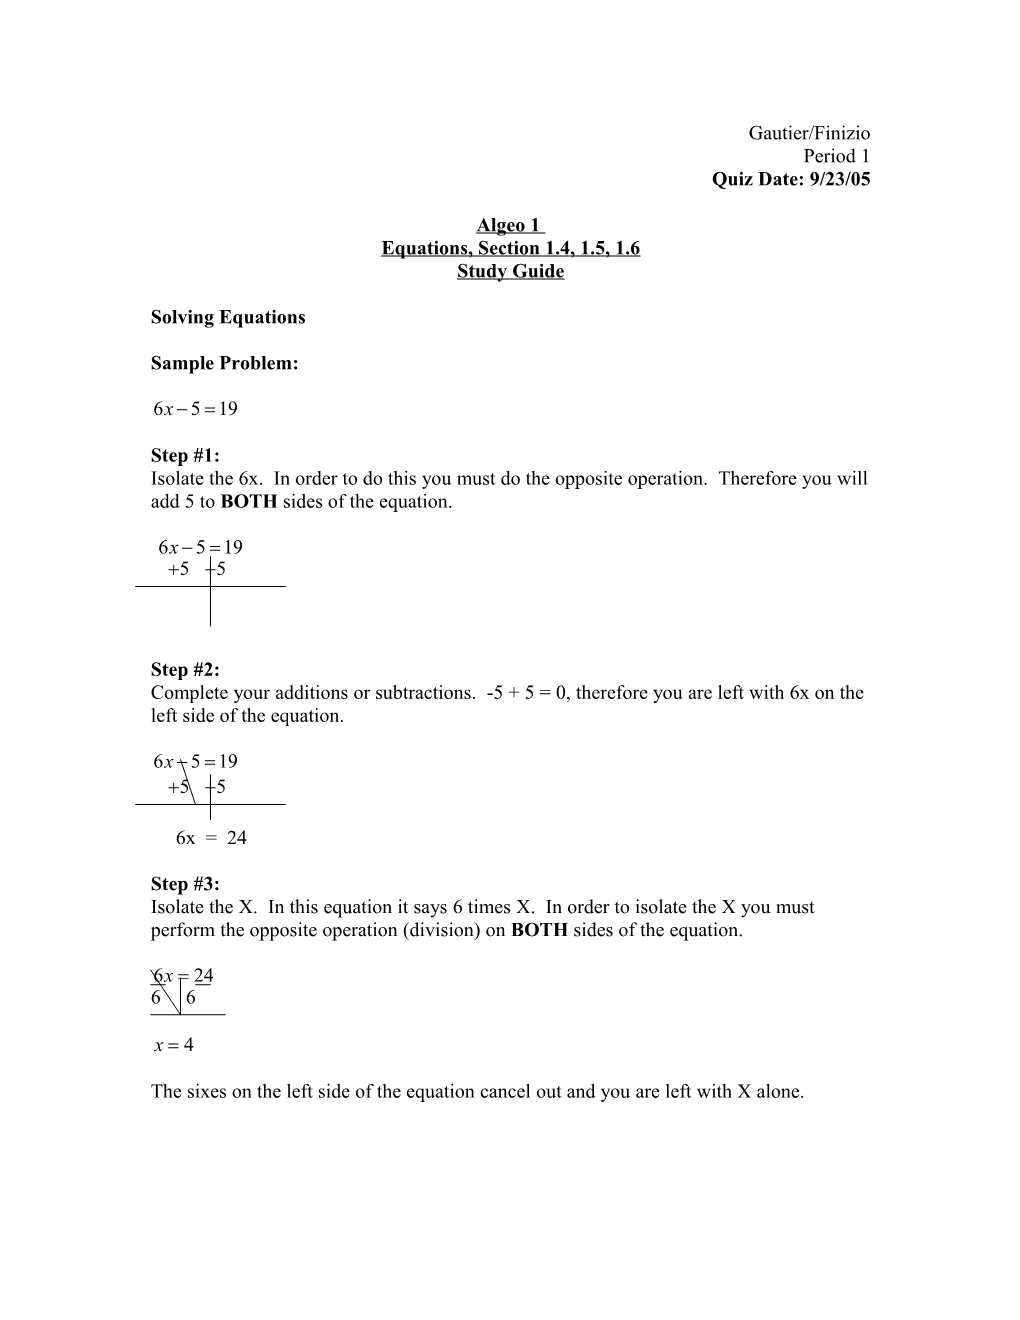 Equations, Section 1.4, 1.5, 1.6